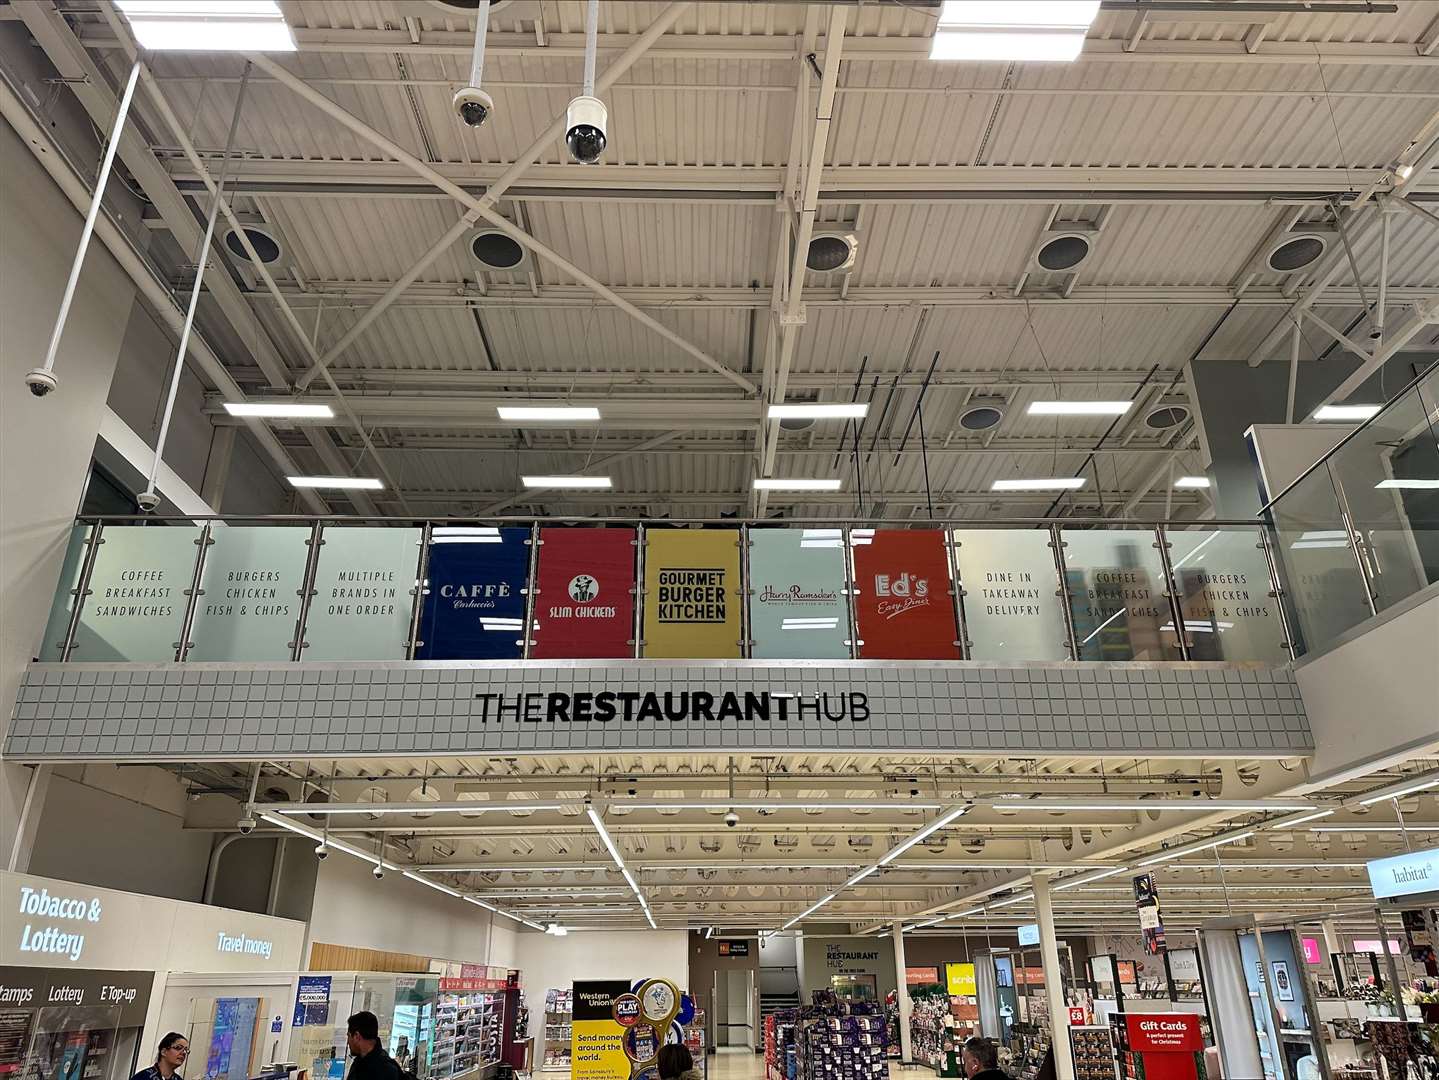 The Restaurant Hub is upstairs where the previous Sainsbury’s restaurant used to be